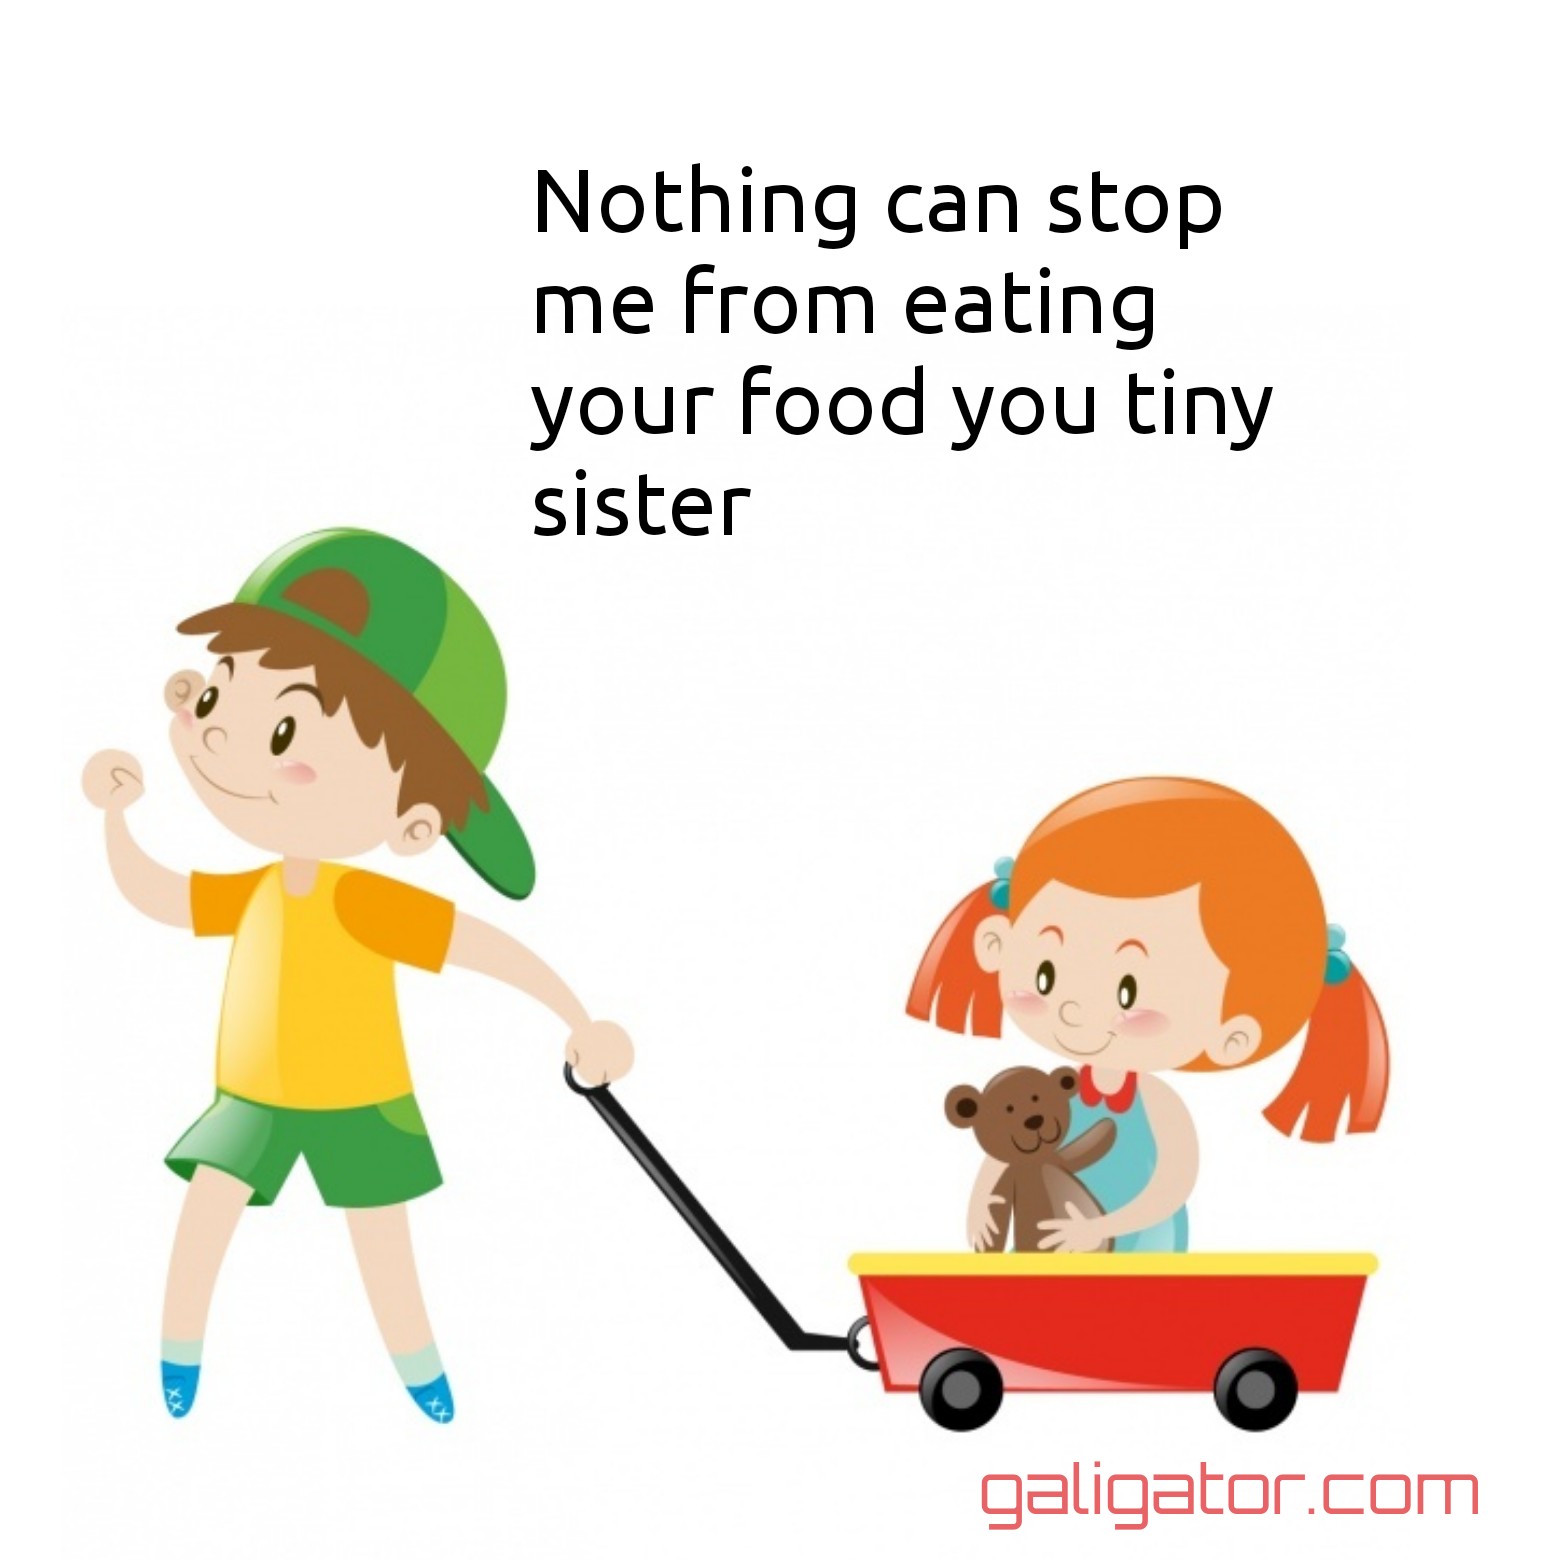  brother sister funny quotes , heart touching emotional brother and sister quotes , quotes about brother and sister relationship , brother sister love quotes, brother sister quotes, brother sister funny quotes , heart touching emotional brother and sister quotes  quotes about brother and sister relationship  ,brother sister love quotes, bonding of brother and sister